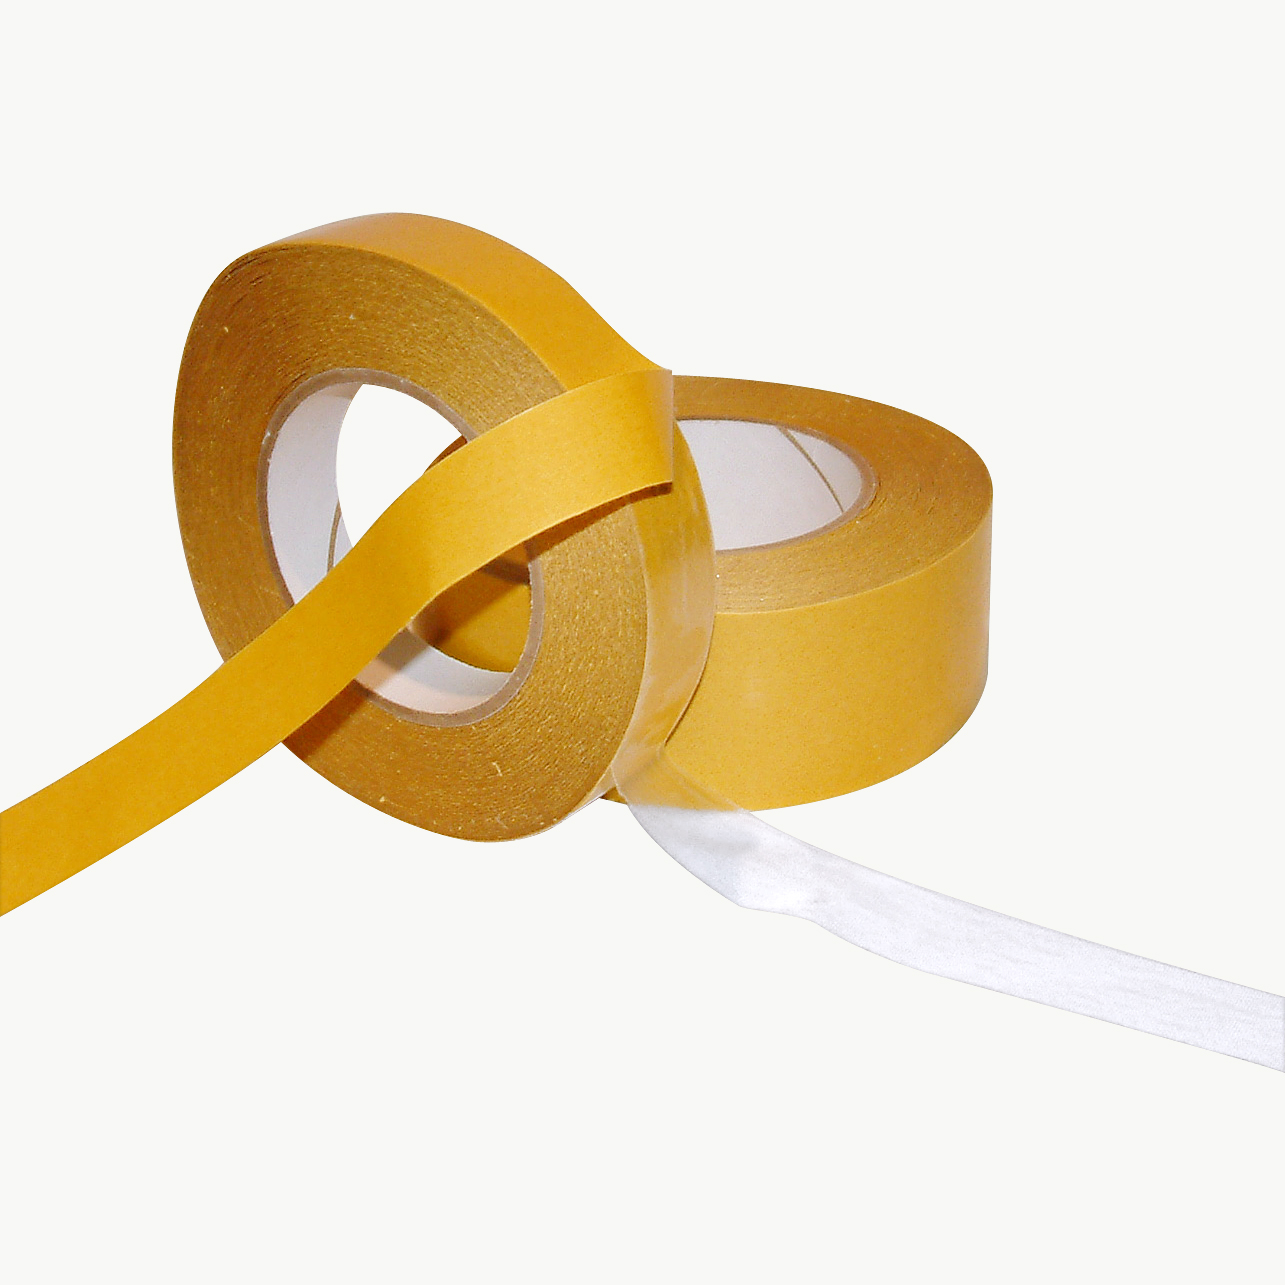 JVCC DC-4109RS Double-Sided Film Tape [Acrylic Adhesive]